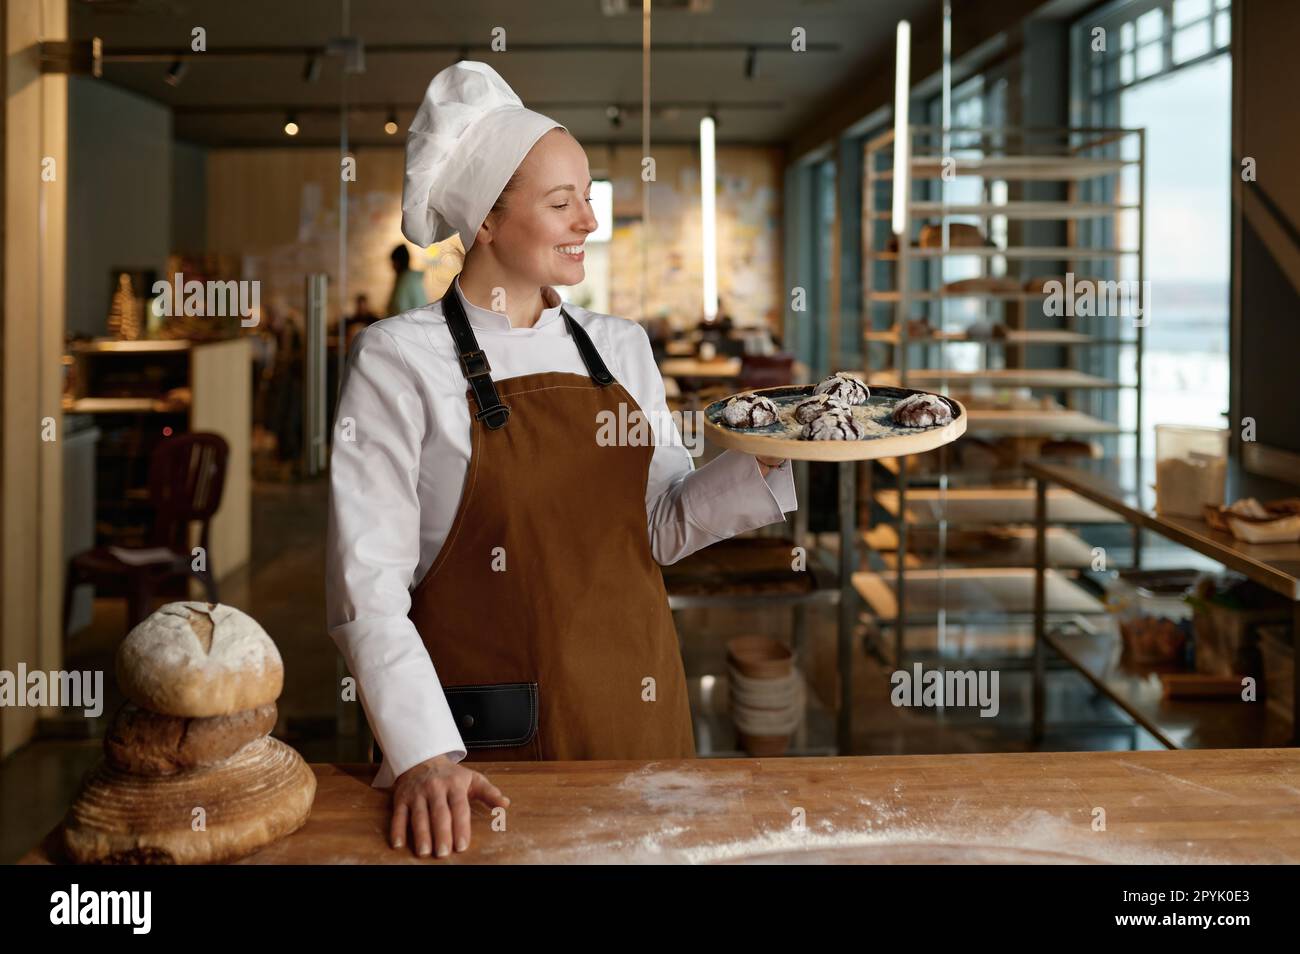 Pastry chef presenting freshly baked cookies standing at bakery kitchen Stock Photo